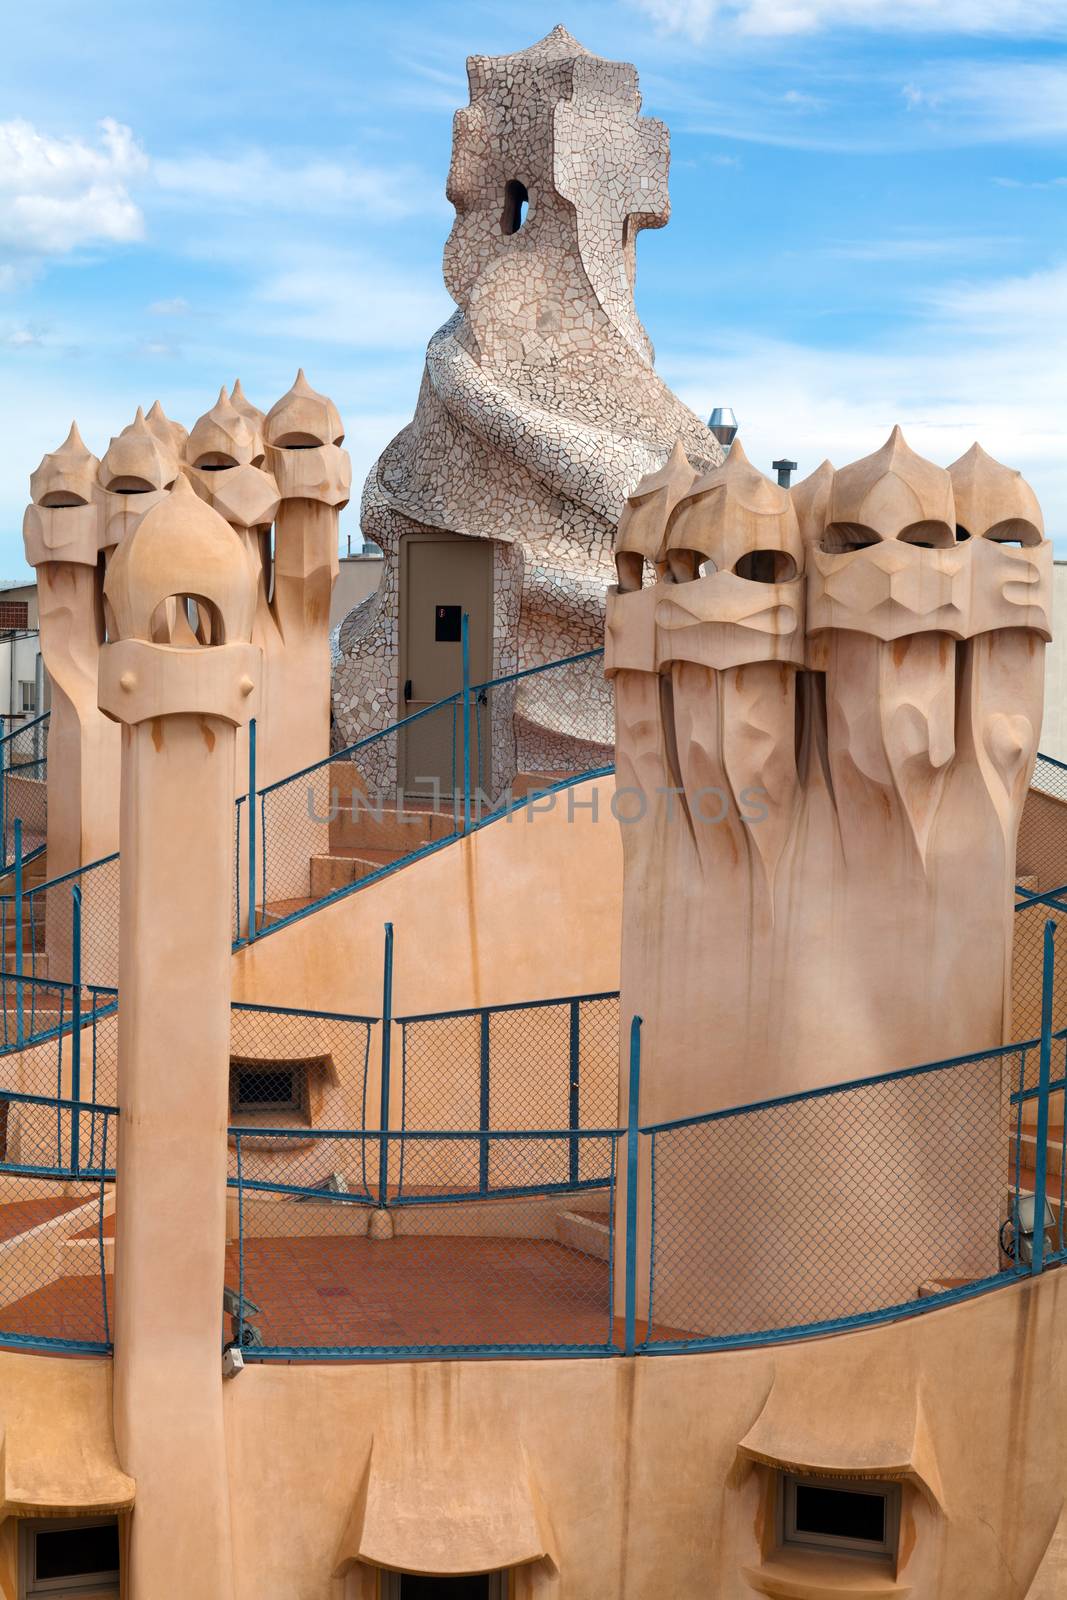 BARCELONA, SPAIN - APRIL 14: Antoni Gaudi's work at the roof of Casa Mila on Apr 14, 2012 in Barcelona, Spain. Popularly known as La Pedrera, this modernist house was built between 1906 and 1910.